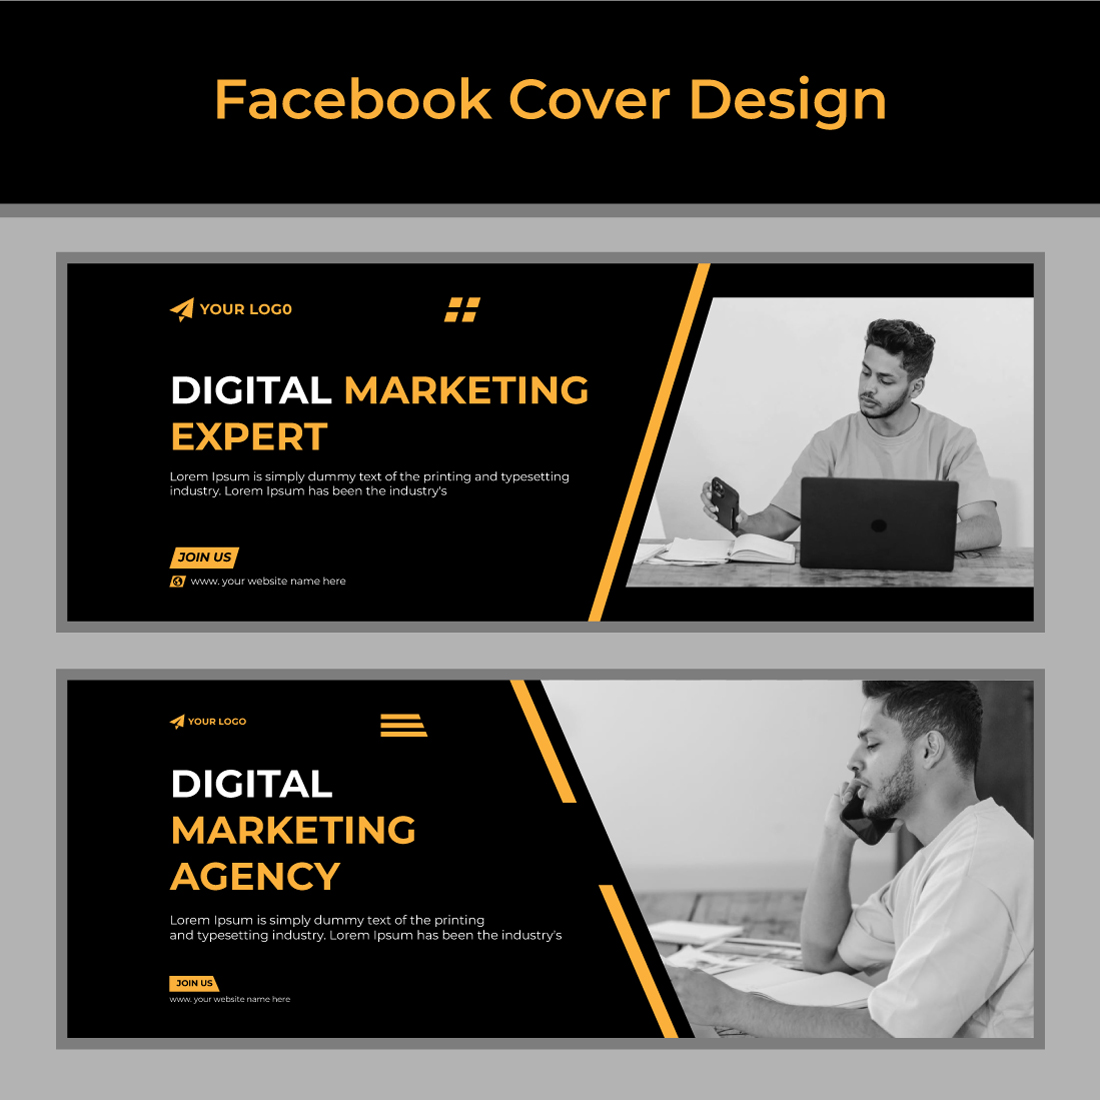 Facebook Cover Design Template preview image.